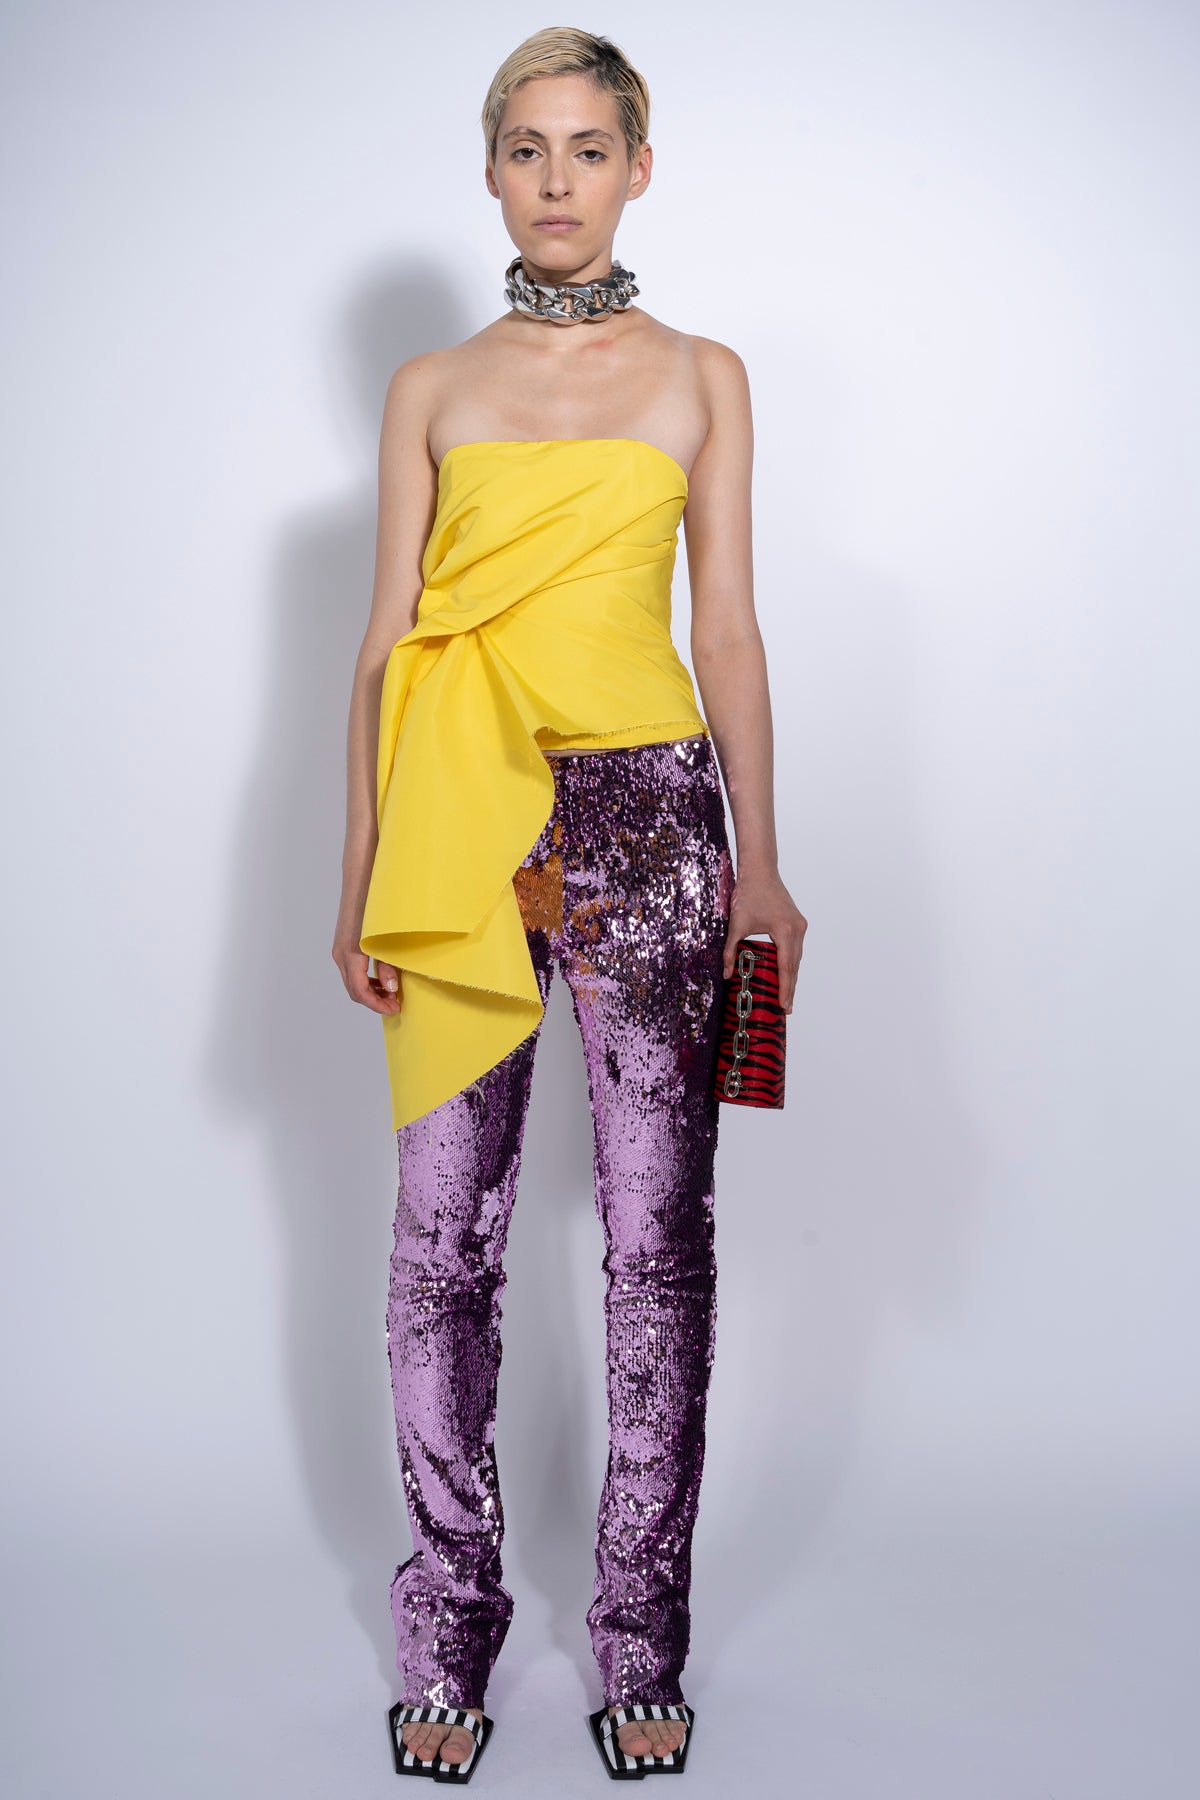 PINK SEQUINS BOOTCUT TROUSERS marques almeida